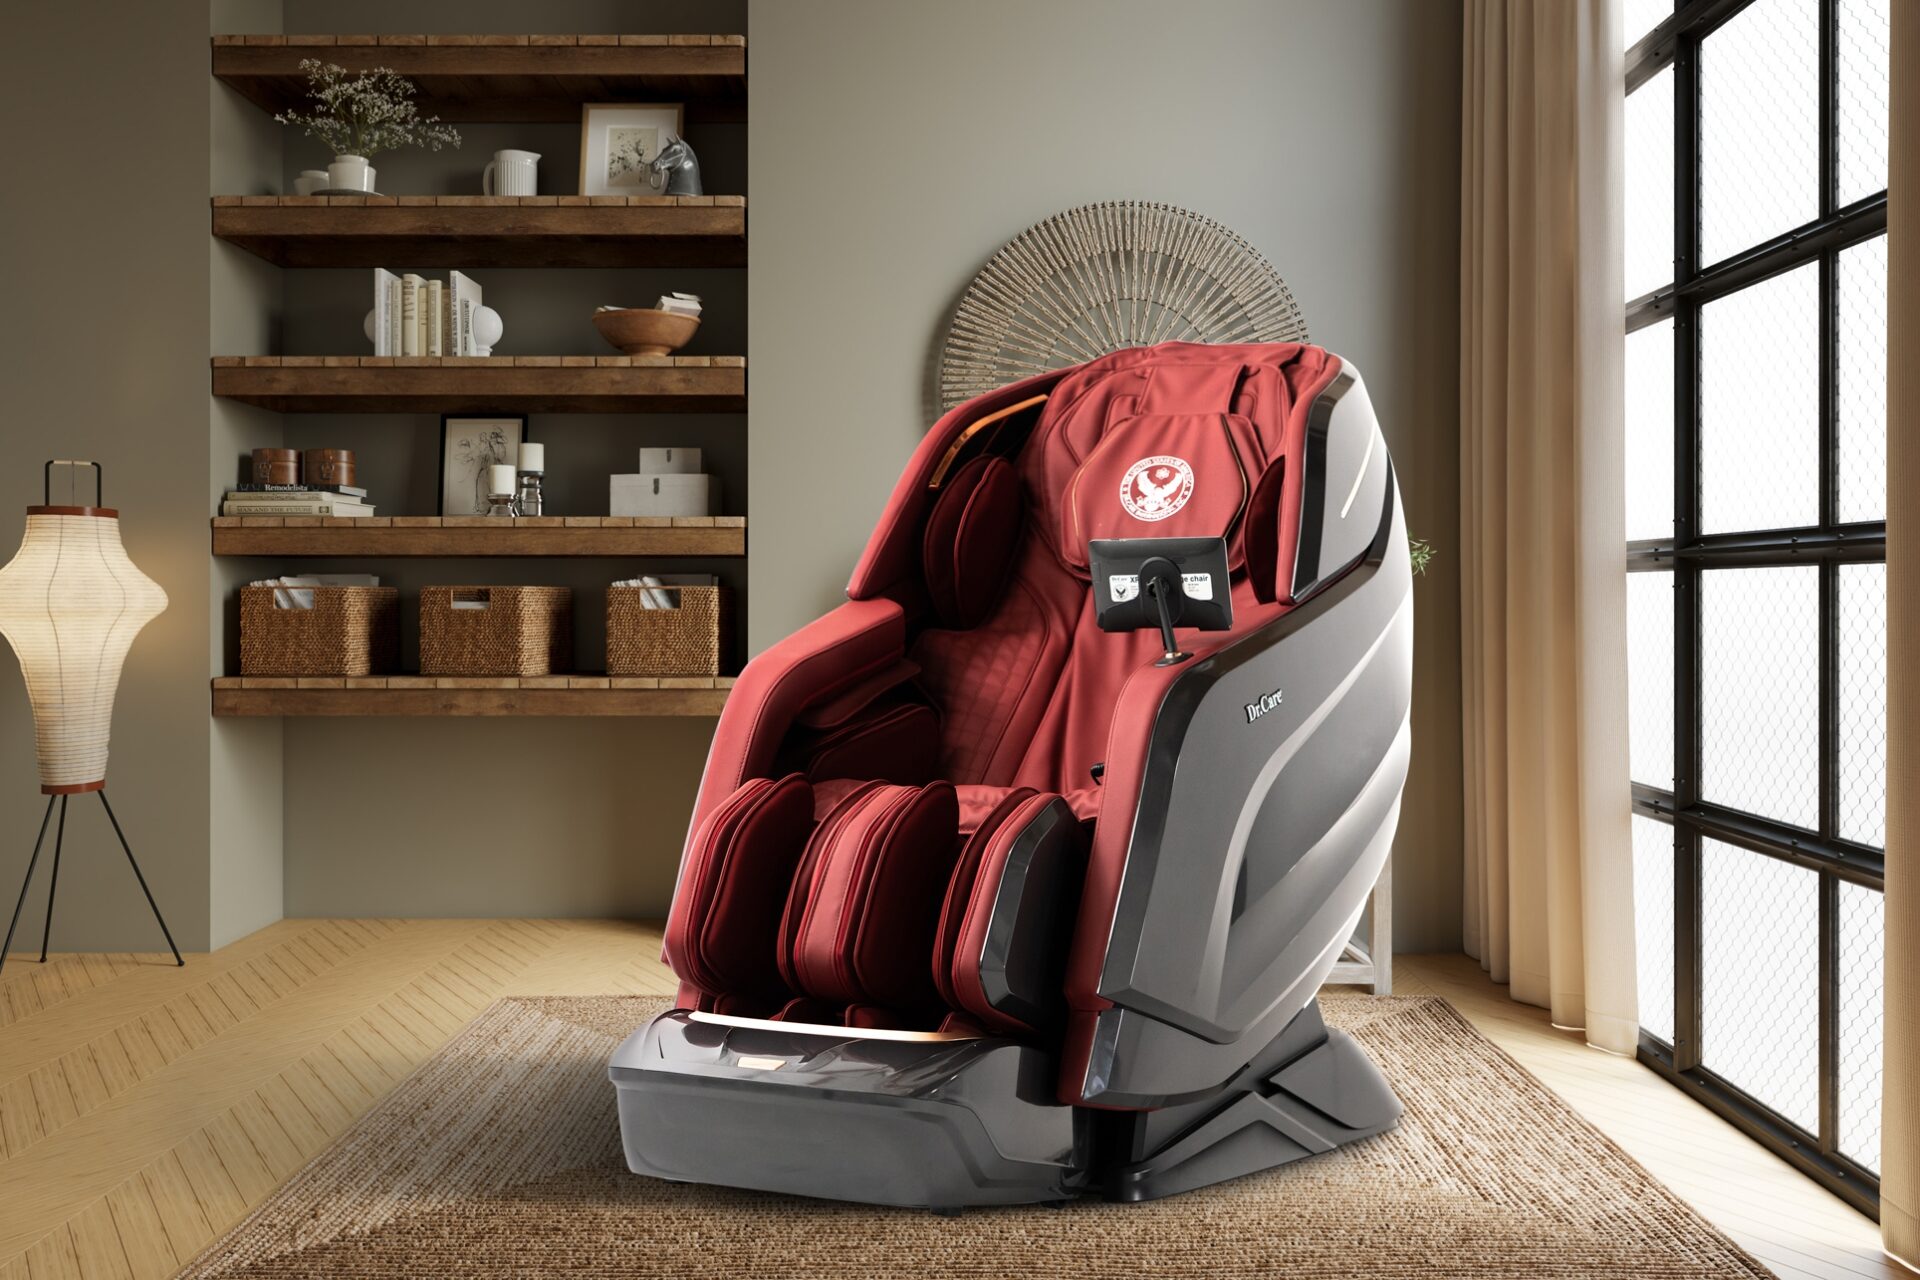 Dr.Care DR-XR 967 XREAL full-body Massage Chair